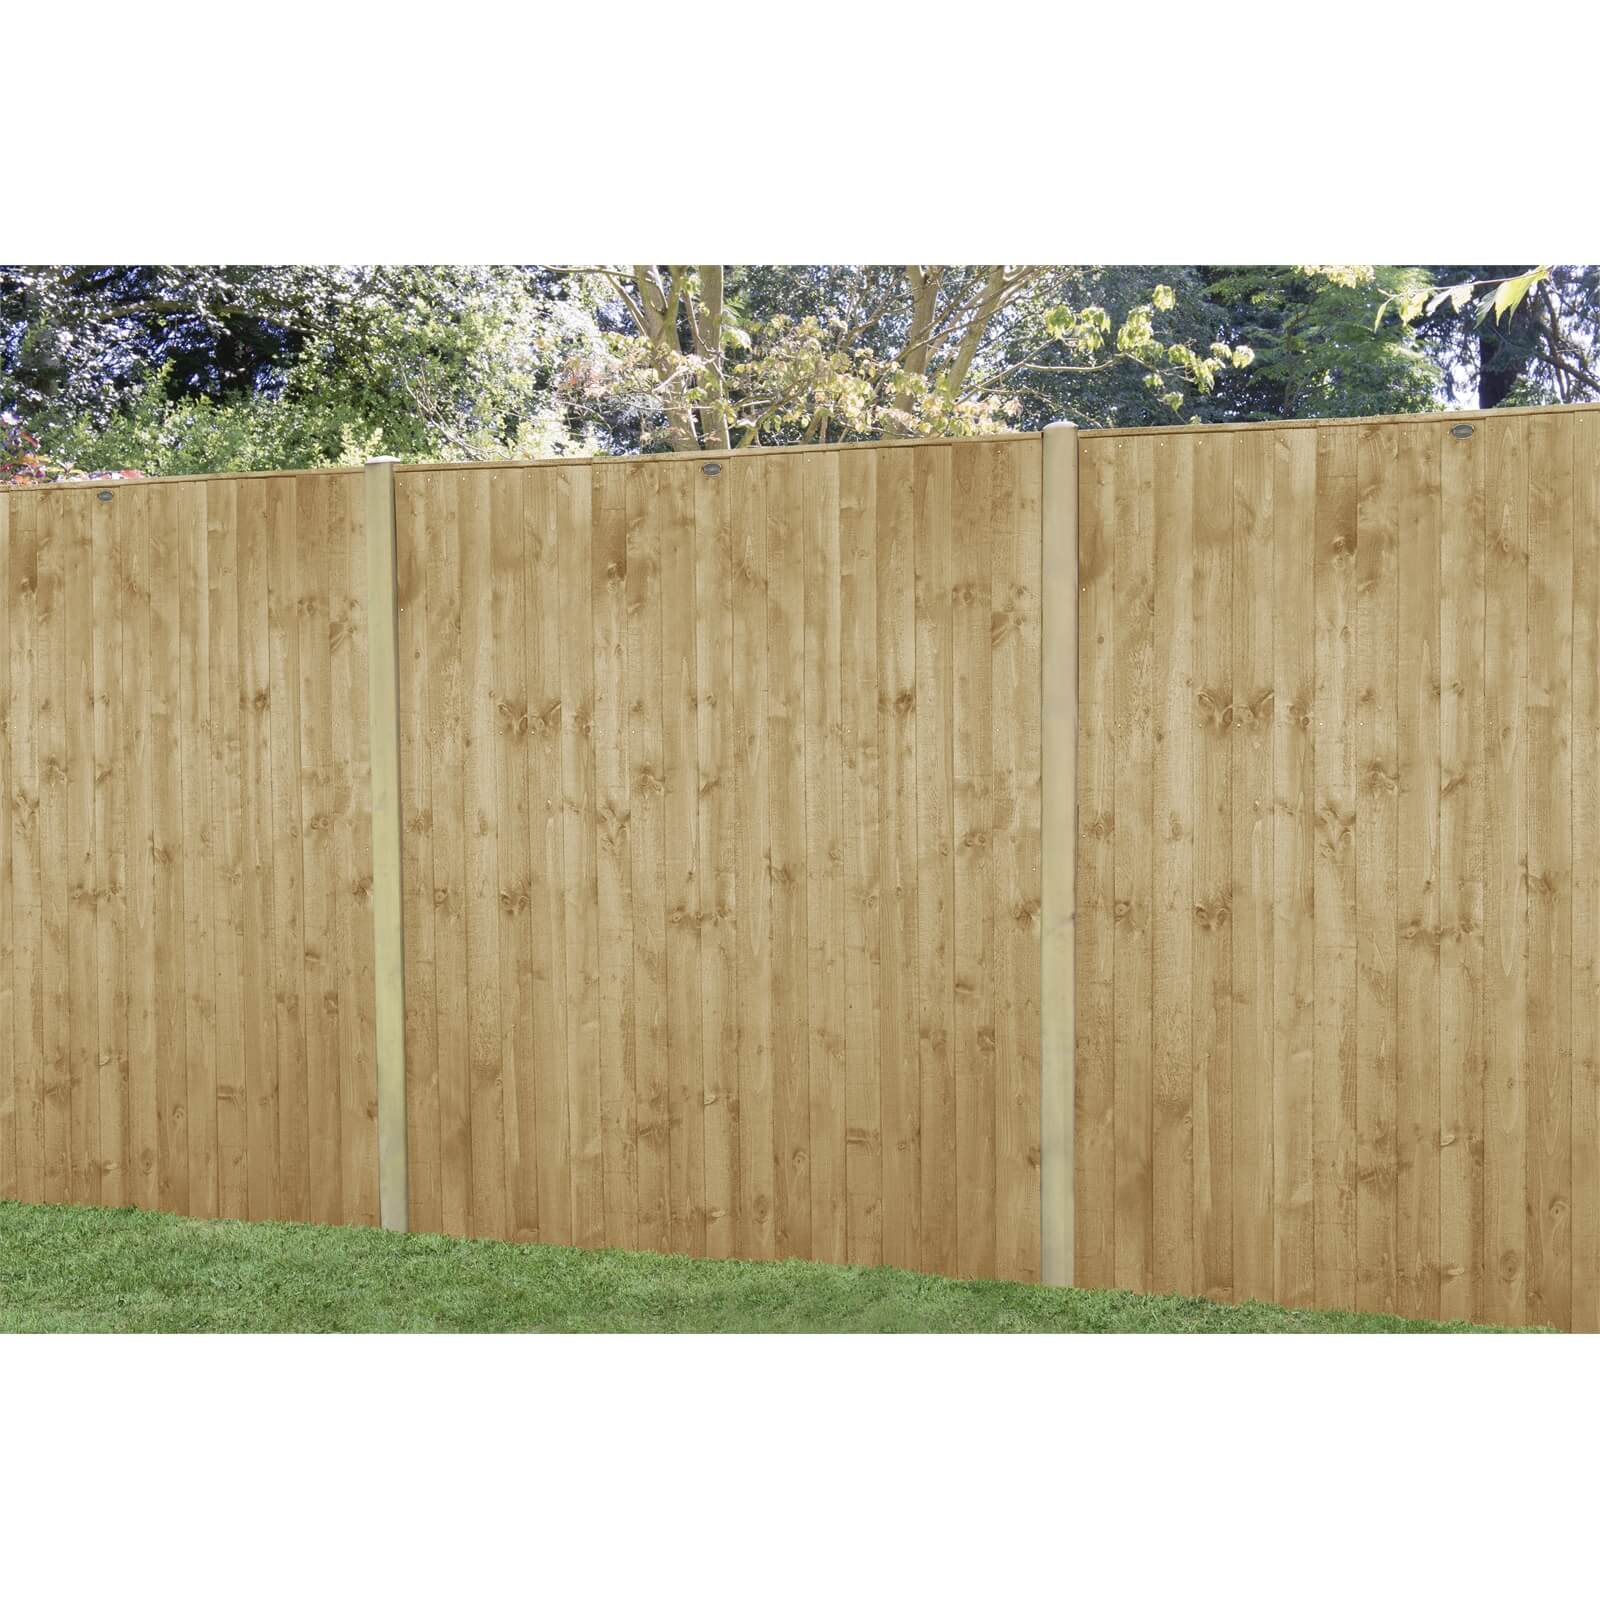 6ft x 6ft (1.83m x 1.85m) Pressure Treated Featheredge Fence Panel - Pack of 4